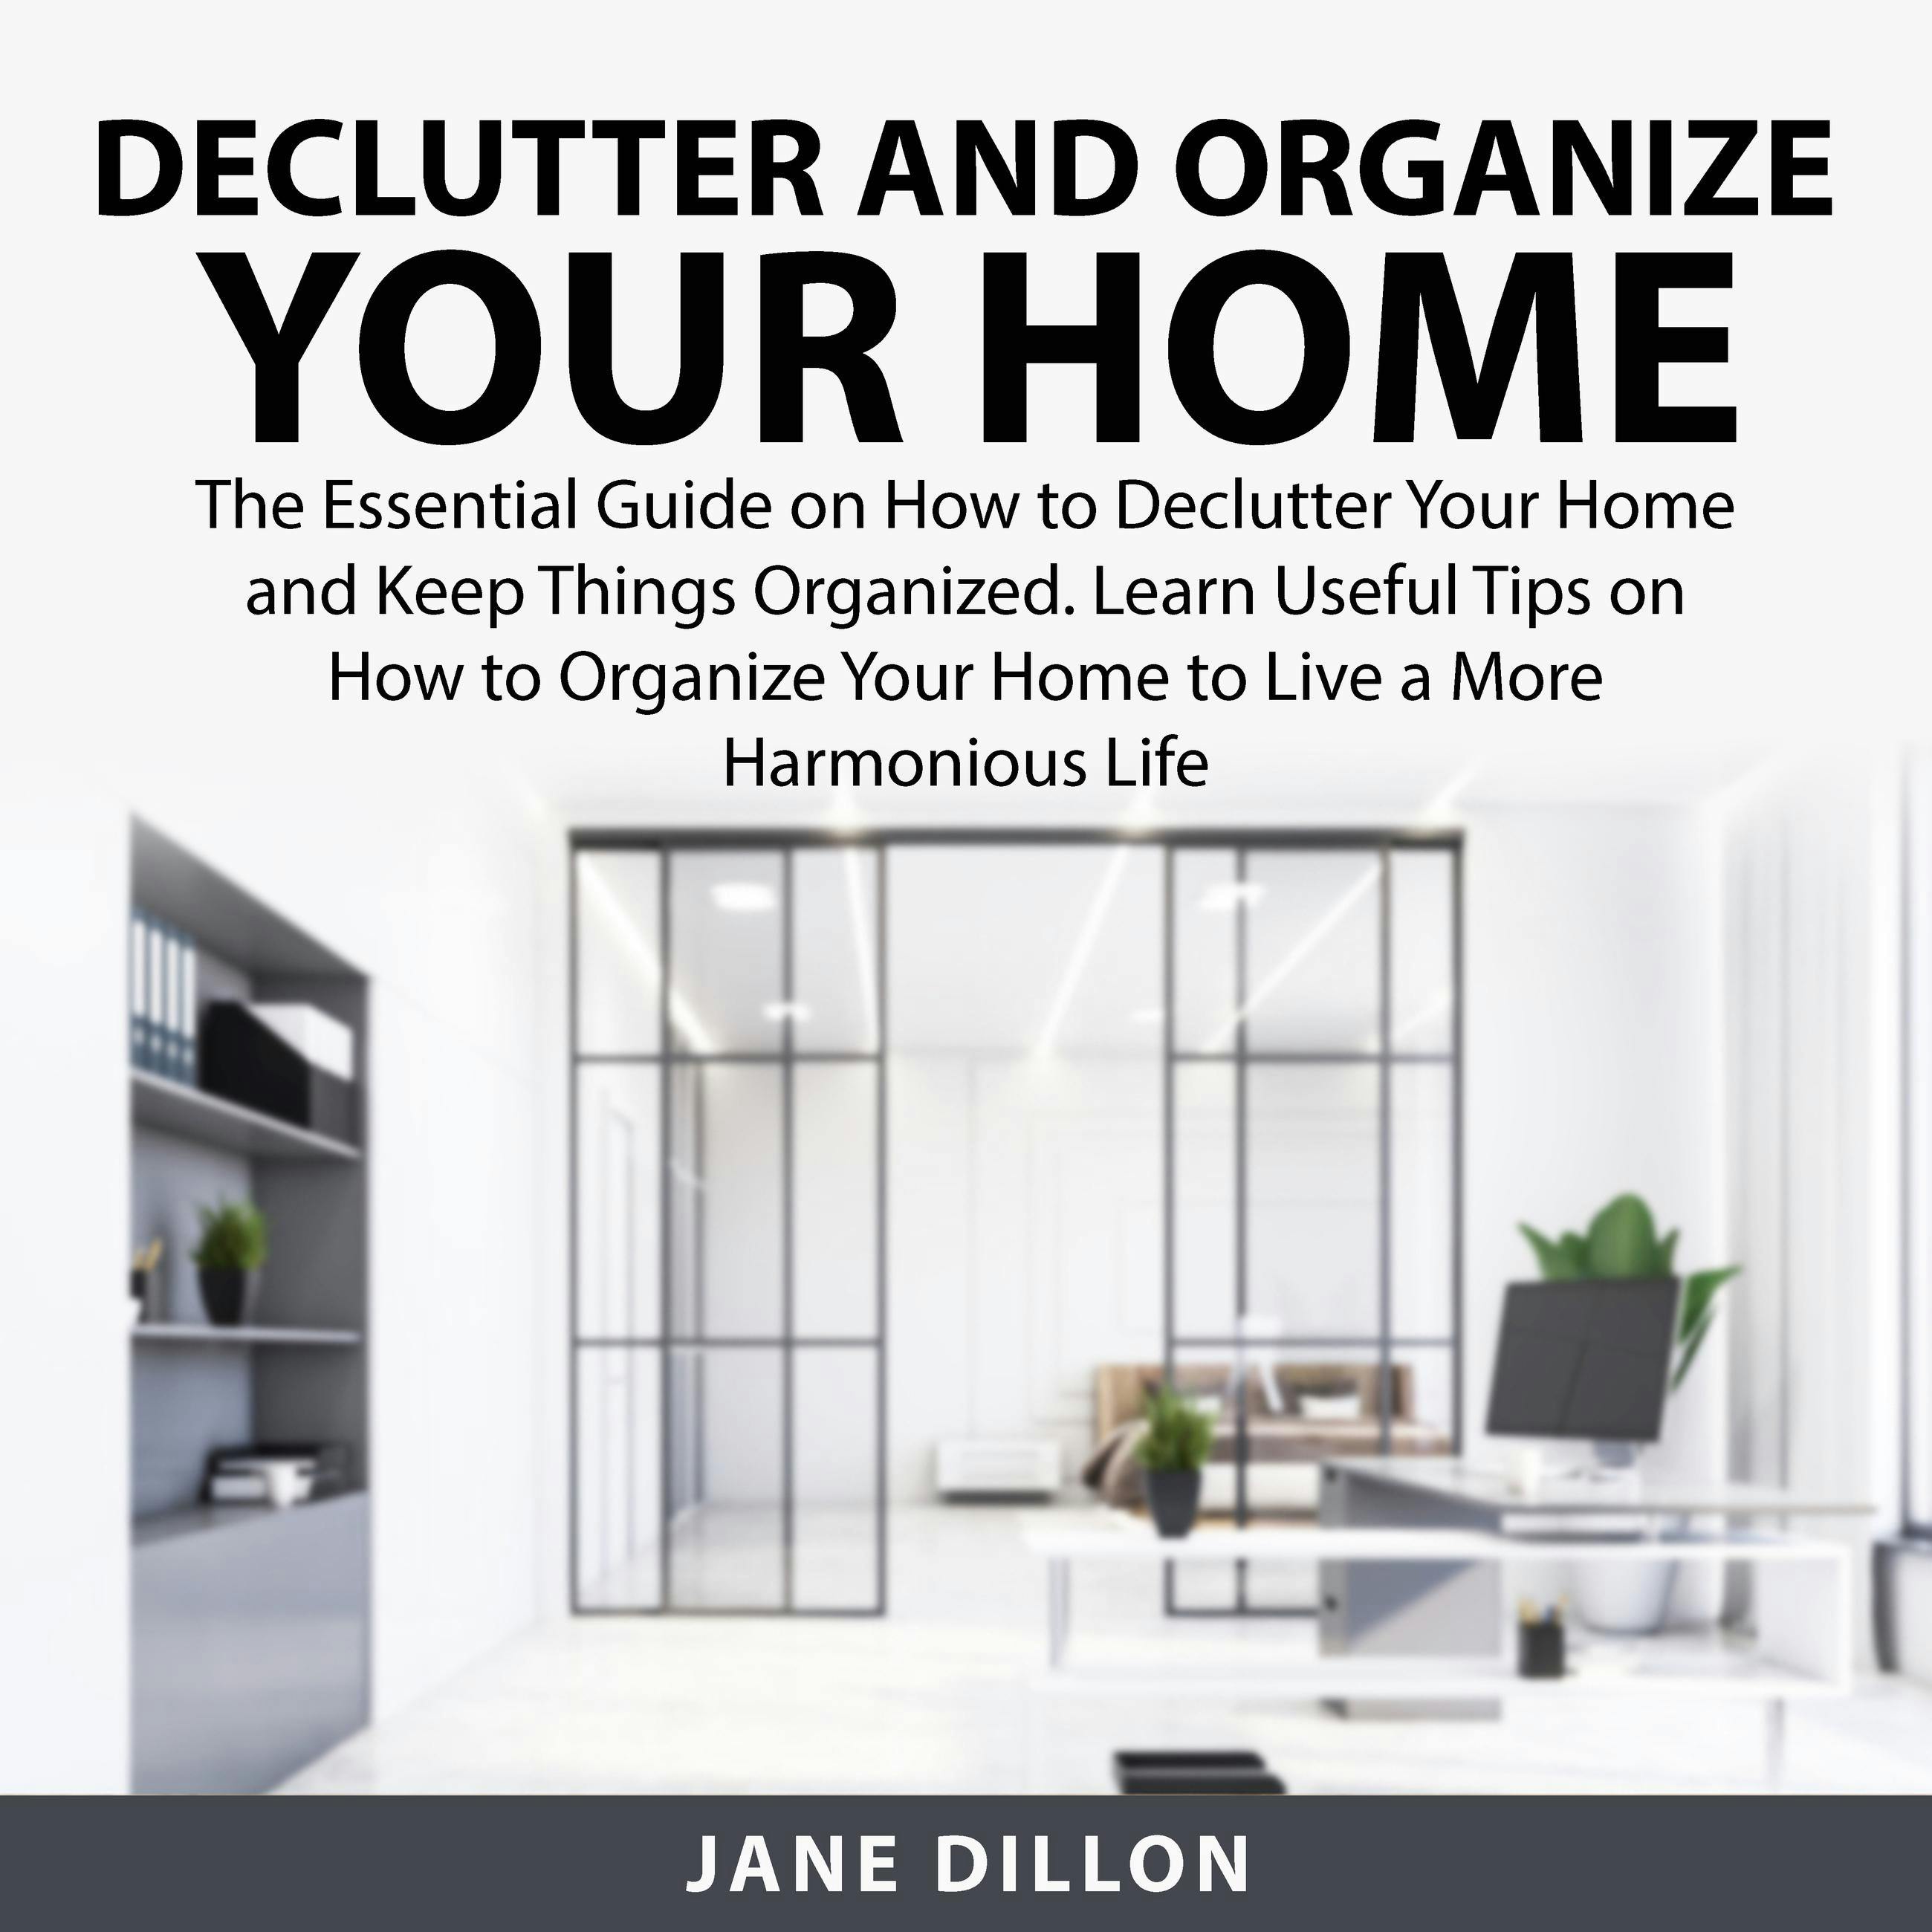 Declutter and Organize Your Home: The Essential Guide on How to Declutter Your Home and Keep Things Organized. Learn Useful Tips on How to Organized Your Home to Live a More Harmonious Life - undefined